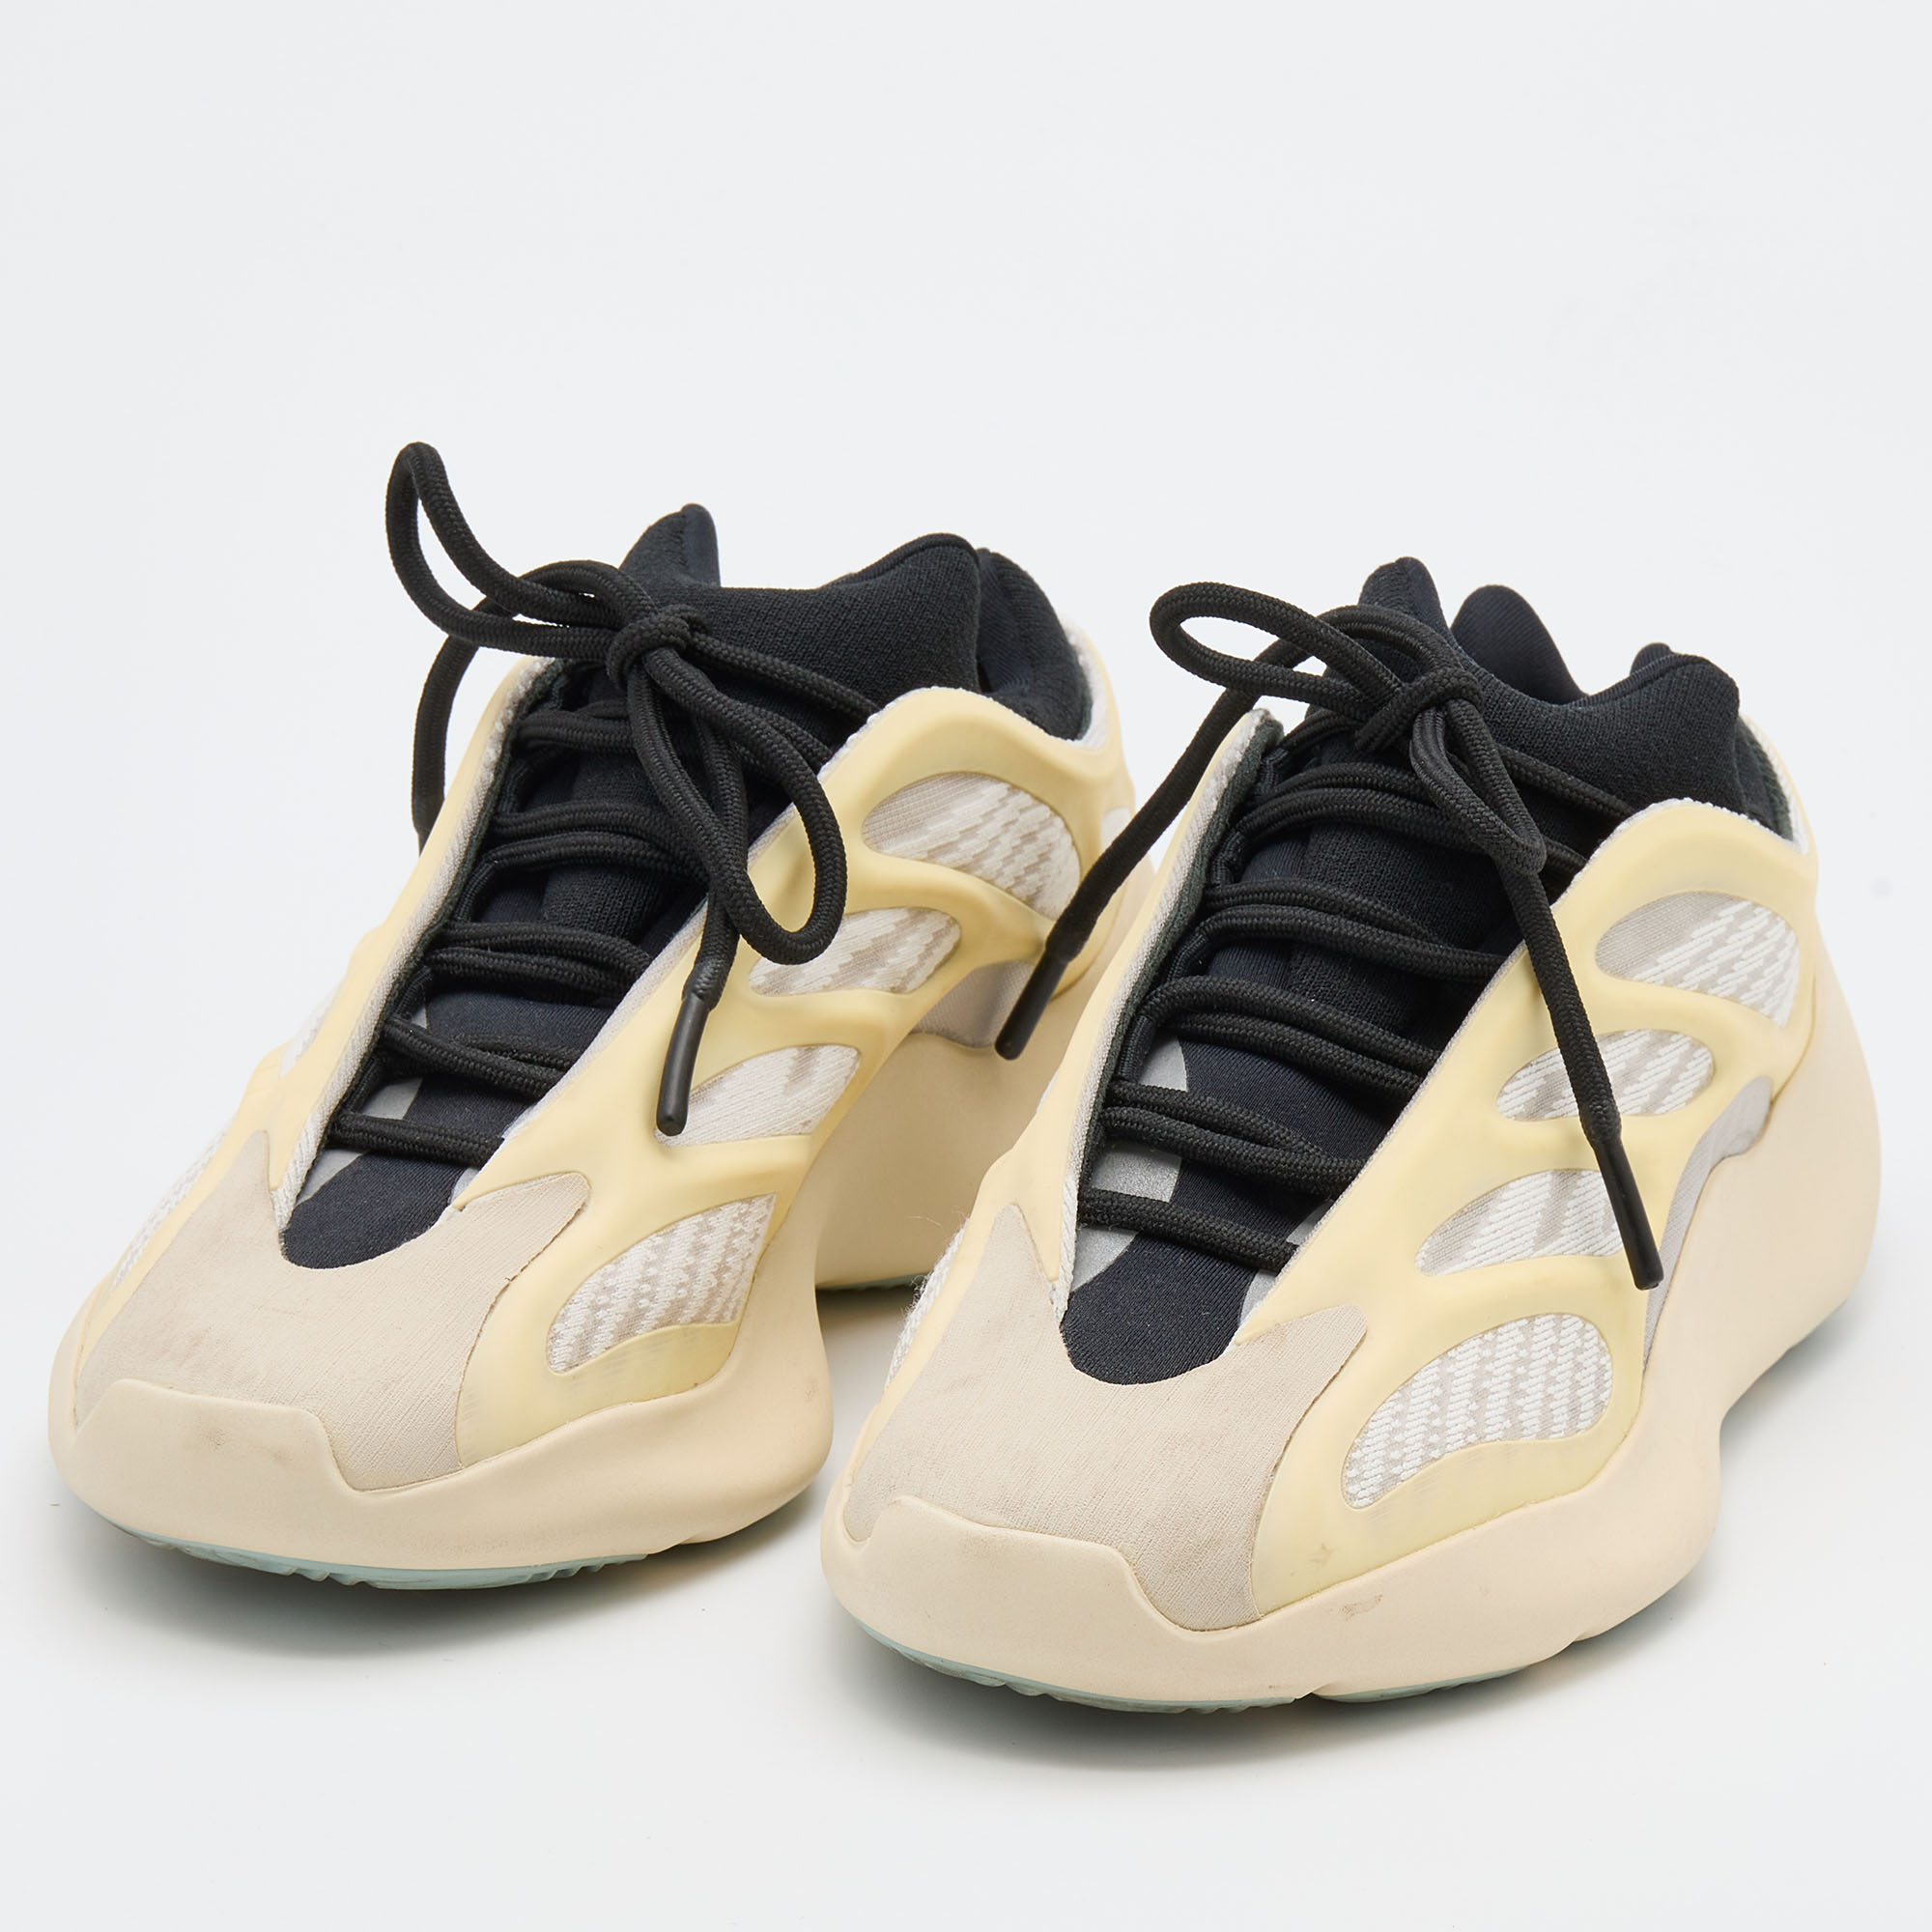 

Yeezy x Adidas Cream/Black Rubber and Mesh 700 V3 Azael Sneakers Size 36 2/3